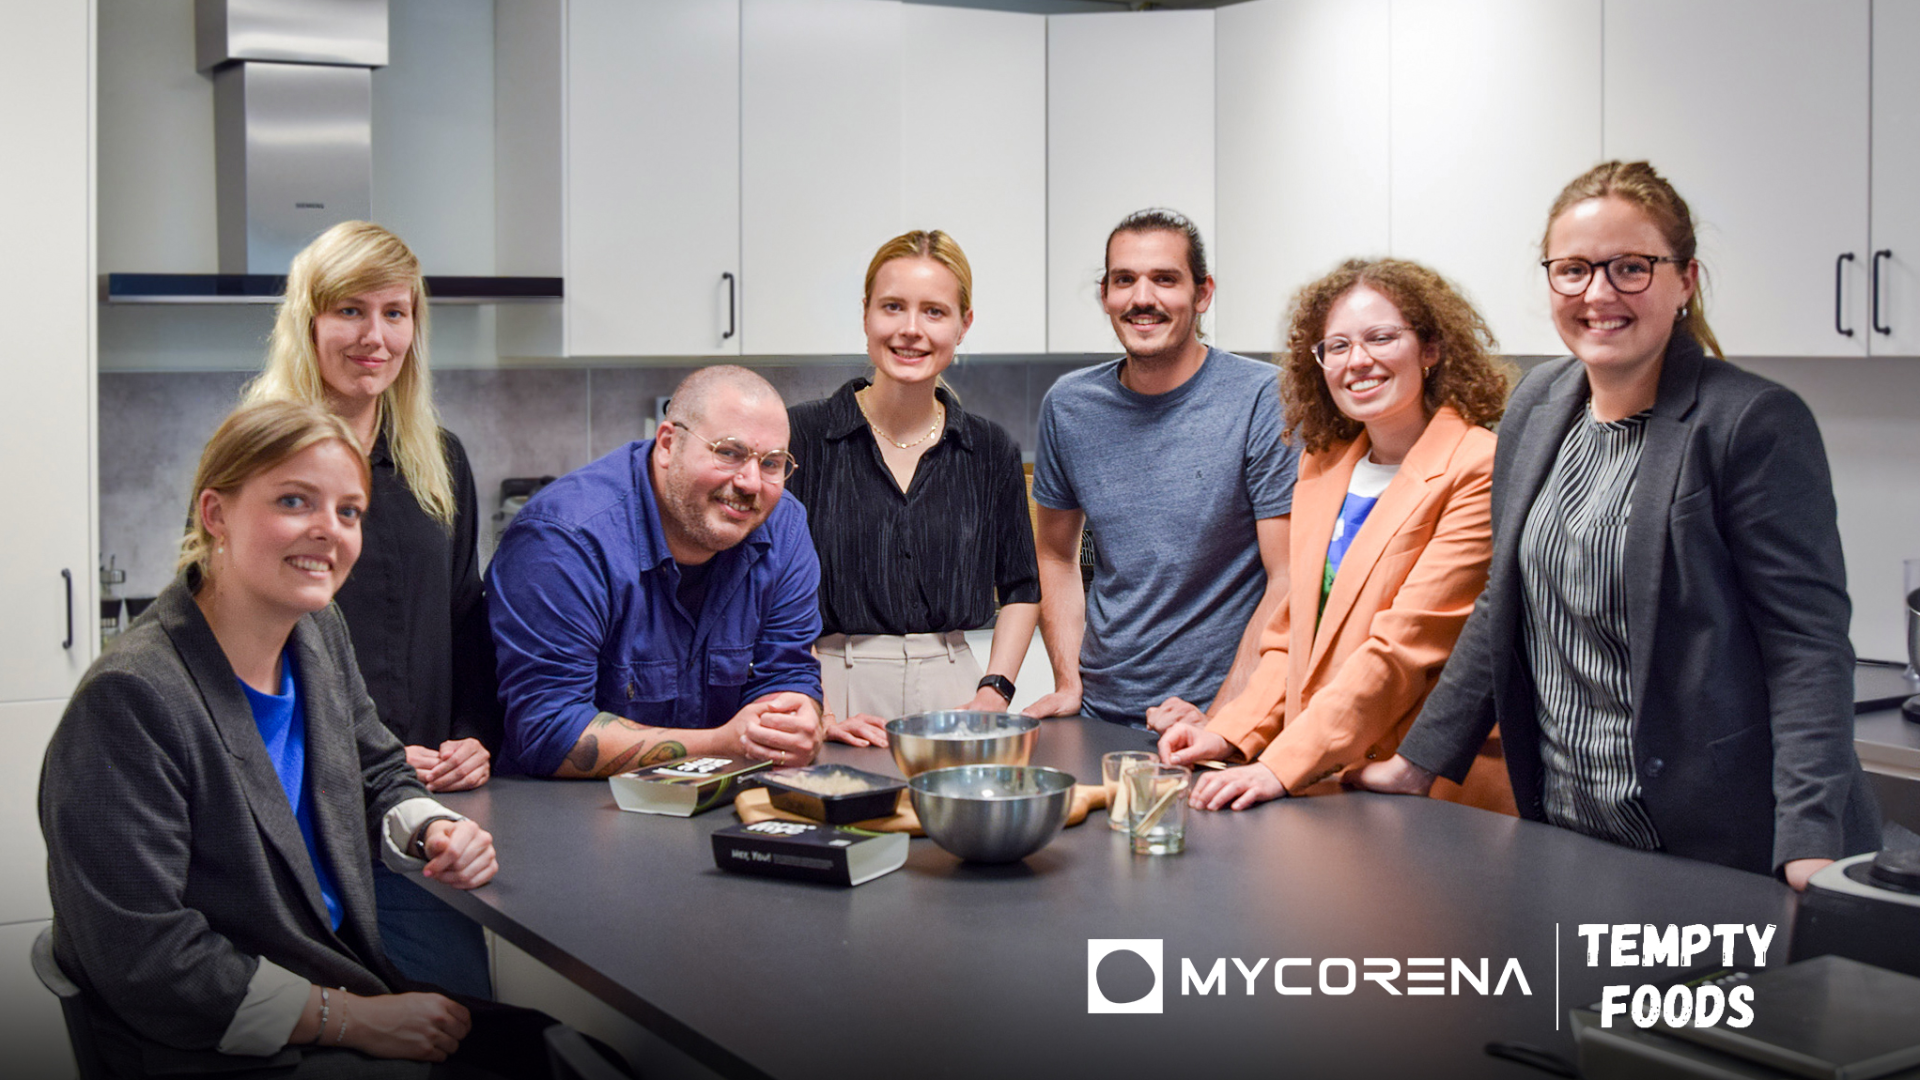 Mycorena fostering the next generation of food startups: New collaboration with promising Danish startup - Tempty Foods